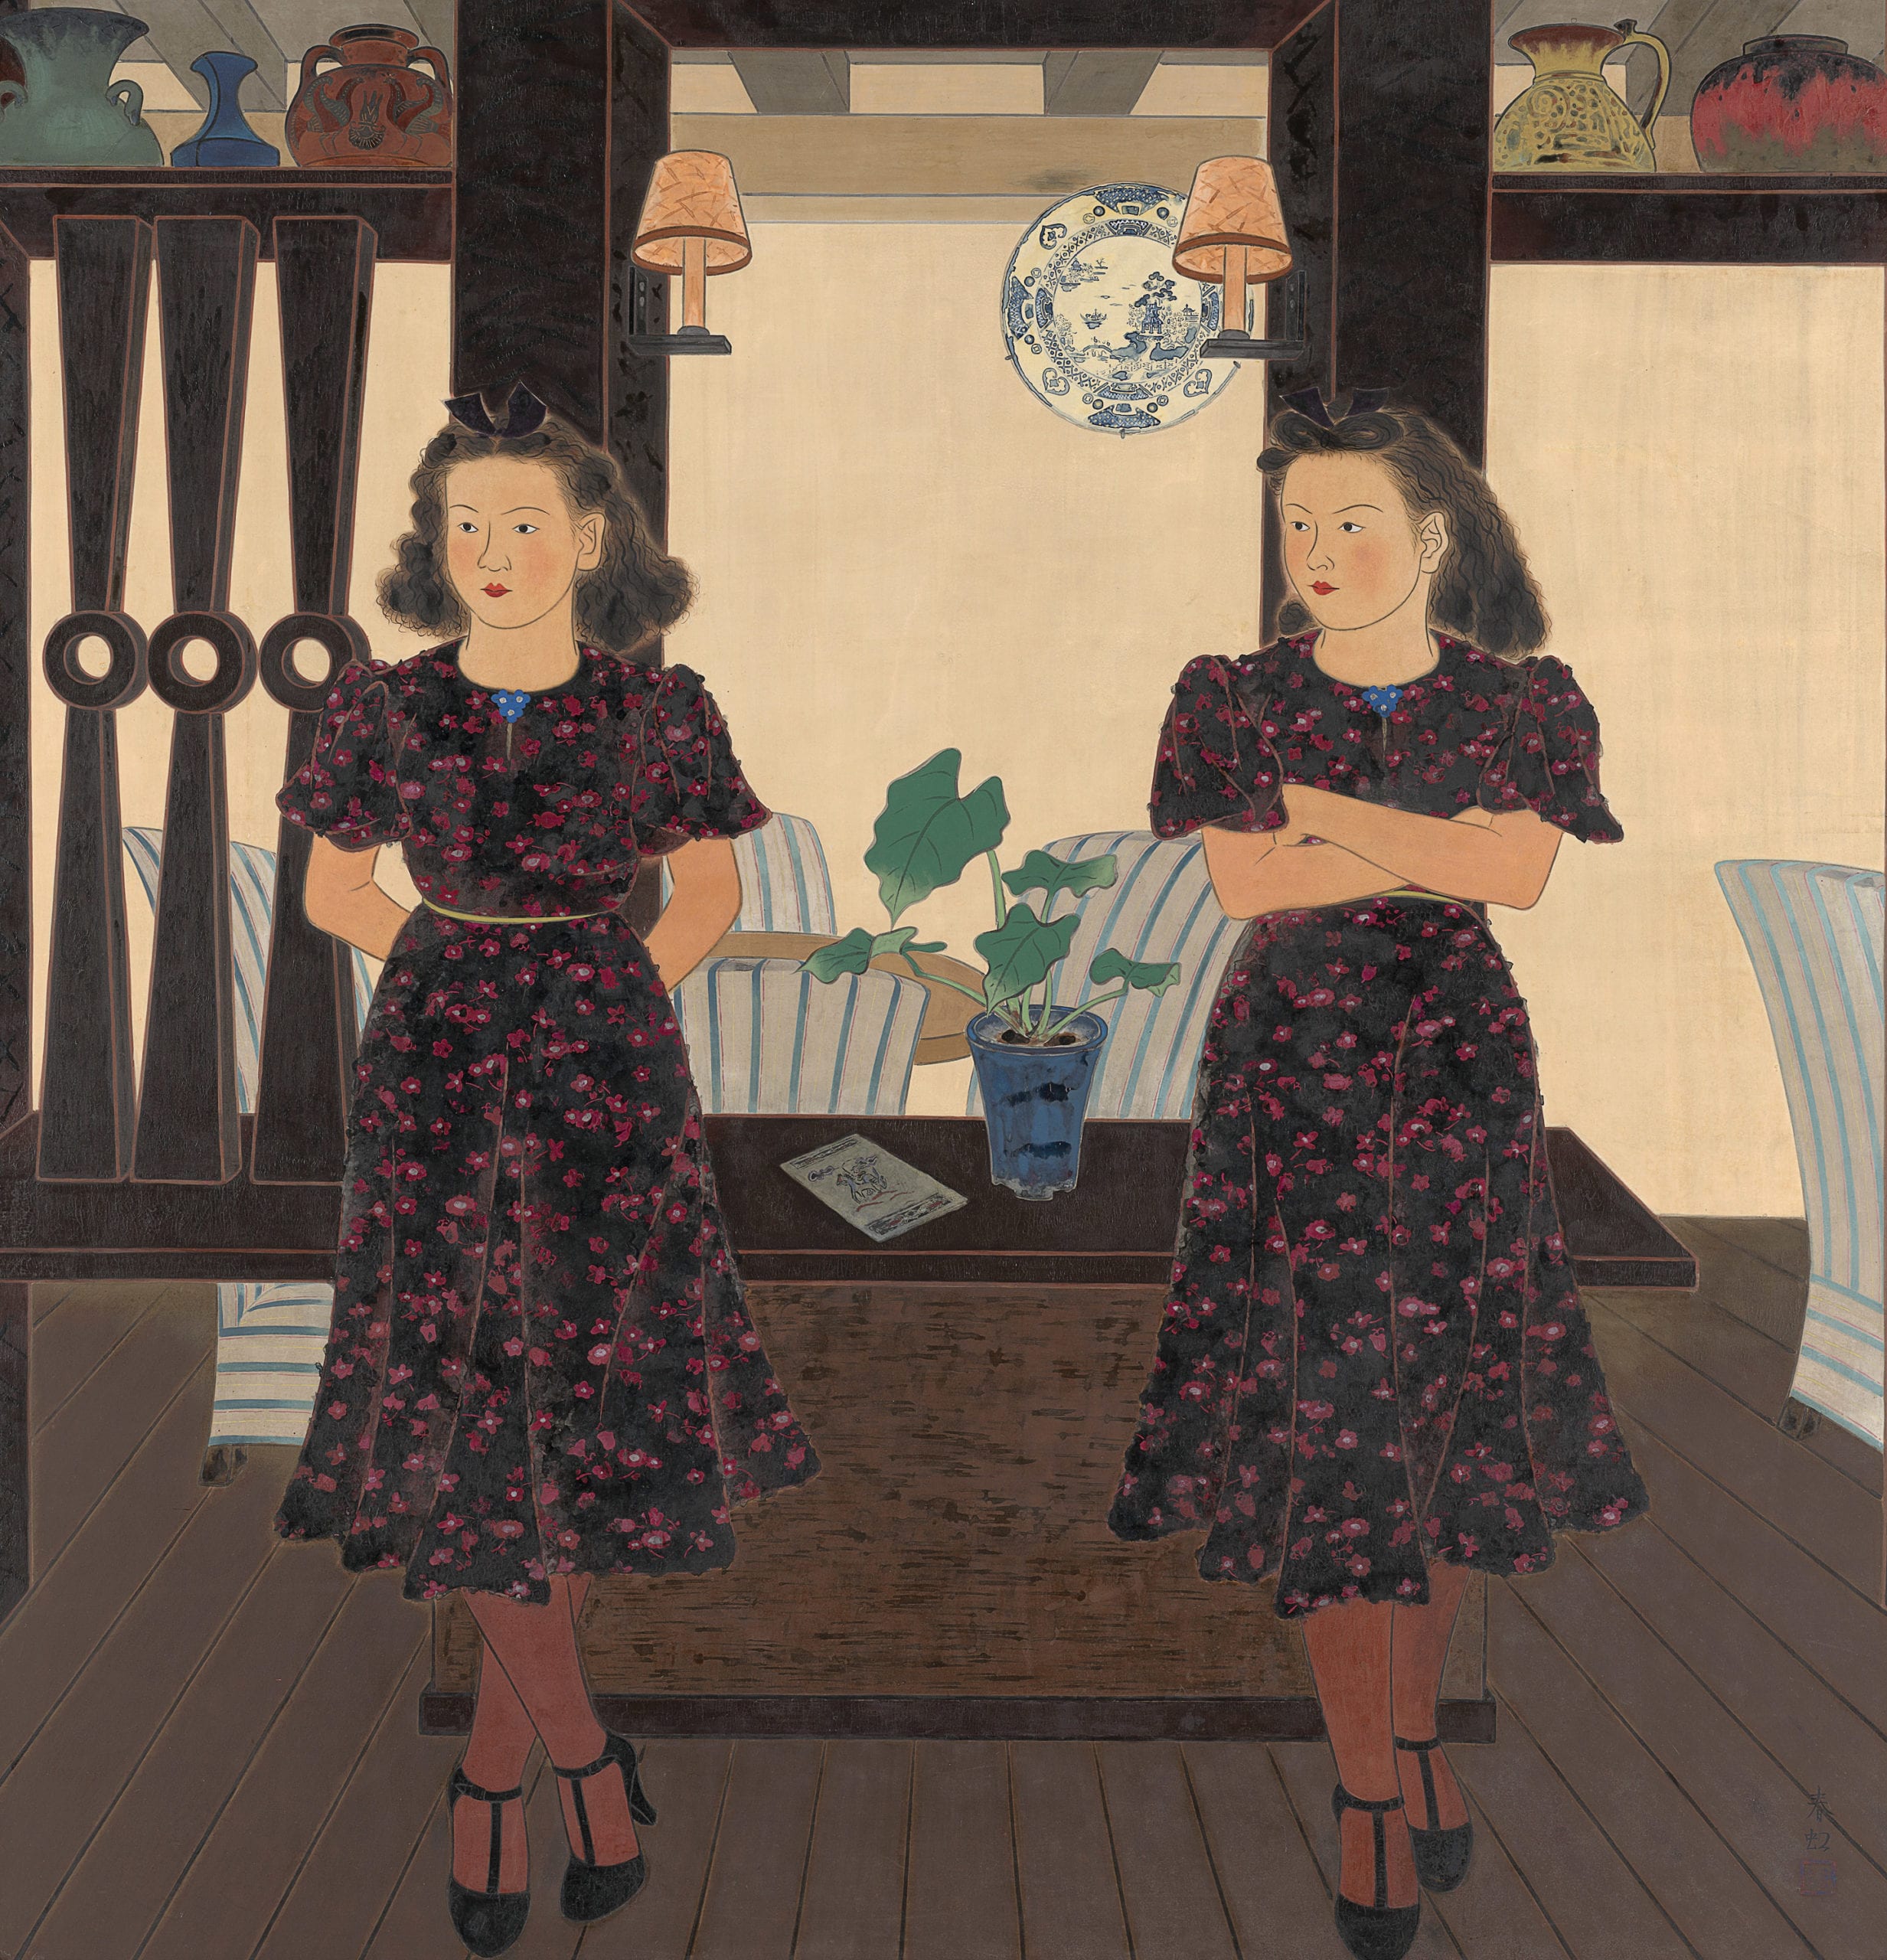 Tea and coffee salon, Sabō’, 1939 by Saeki Shunkō. National Gallery of Victoria, Melbourne. Purchased with funds donated by Alan and Mavourneen Cowen, The Myer Foundation and the NGV Supporters of Asian Art, 2015